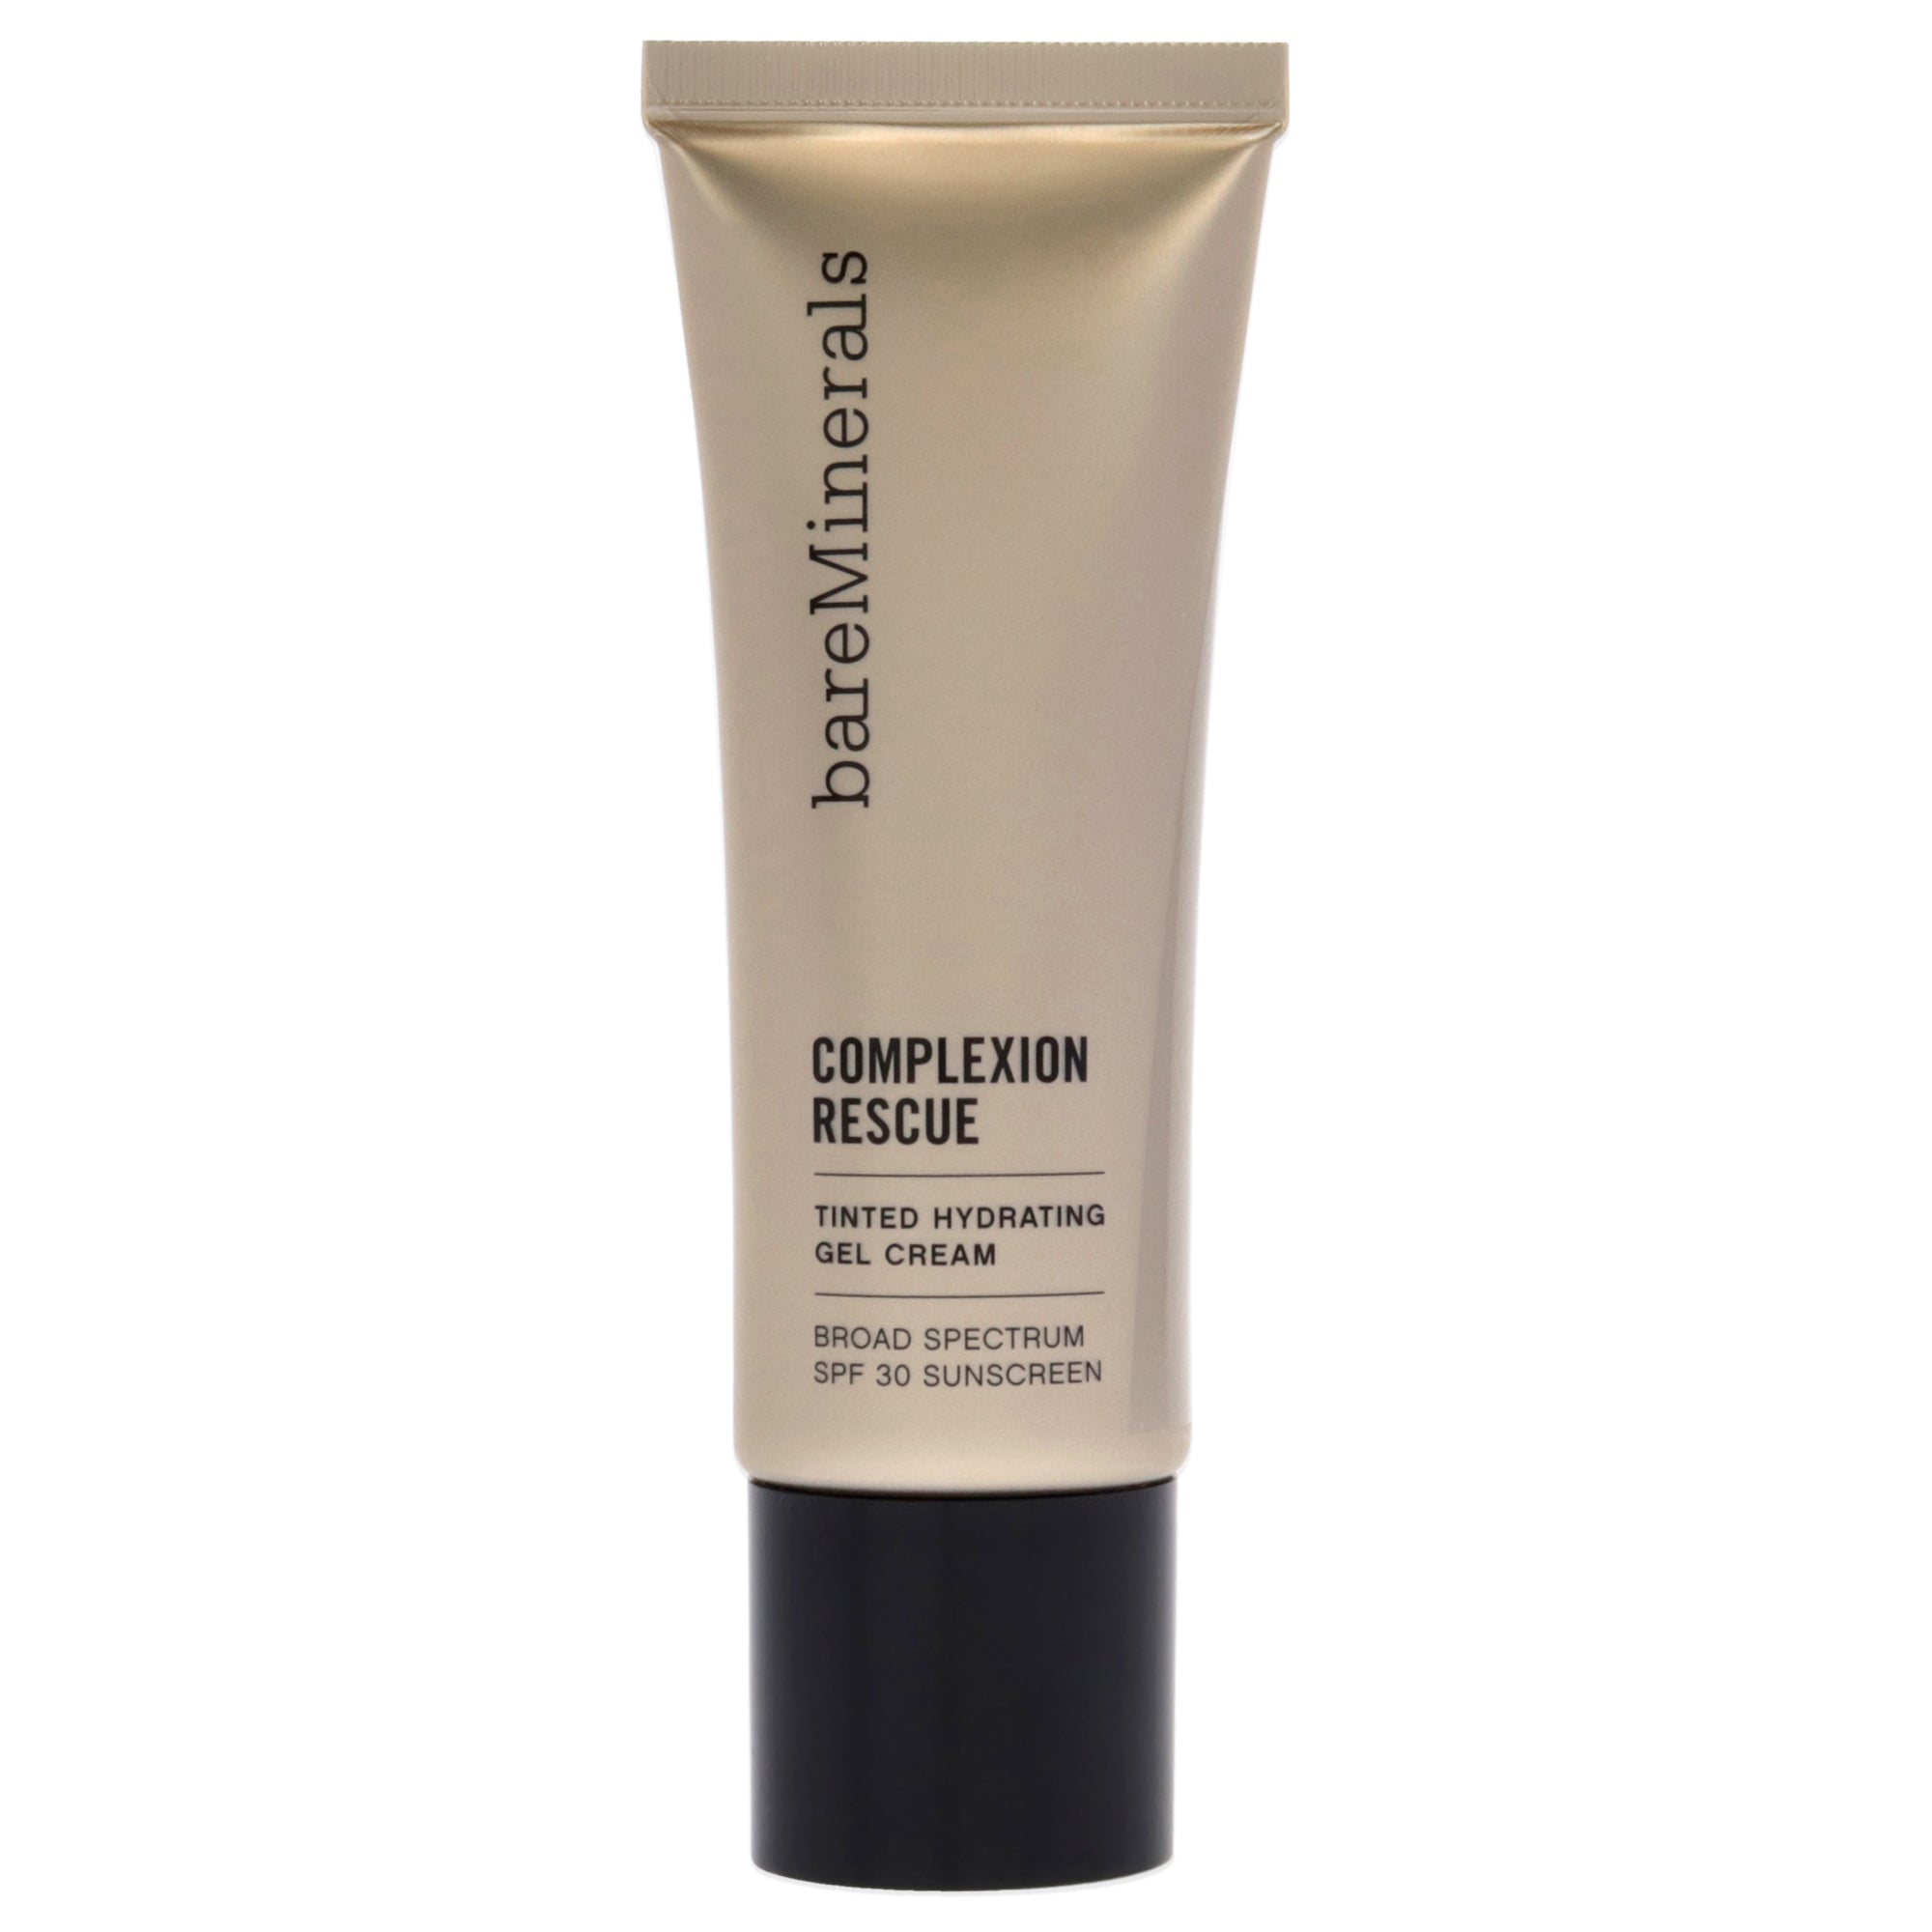 Complexion Rescue Tinted Hydrating Gel Cream SPF 30 - 02 Vanilla by bareMinerals for Women - 1.18 oz Foundation